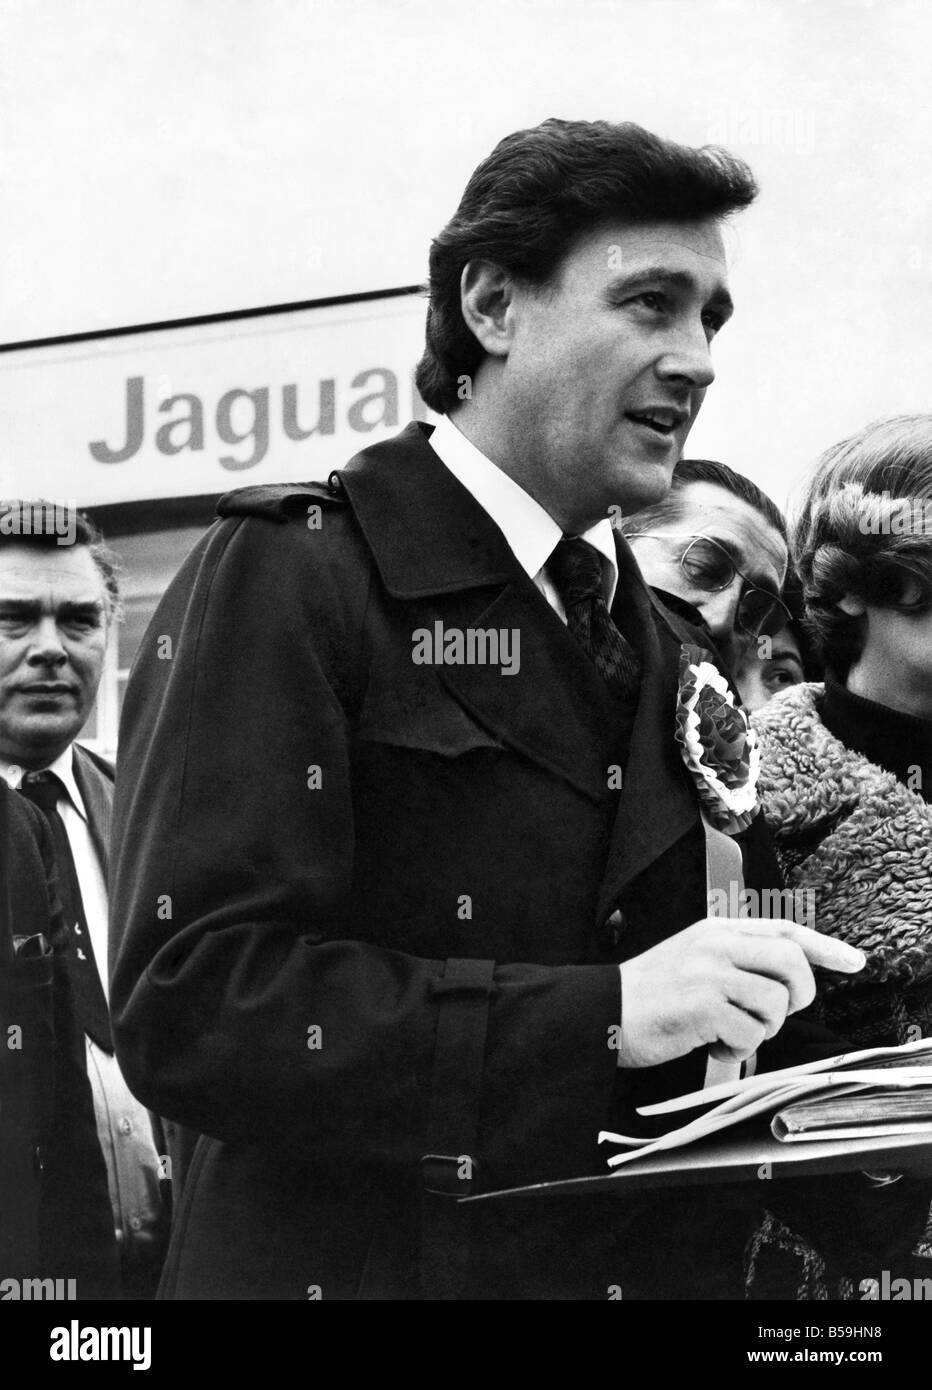 Geoffrey Robinson Labour MP sen here speaking outside the gates of the Jaguar car plant in Coventry. February 1976 P008063 Stock Photo